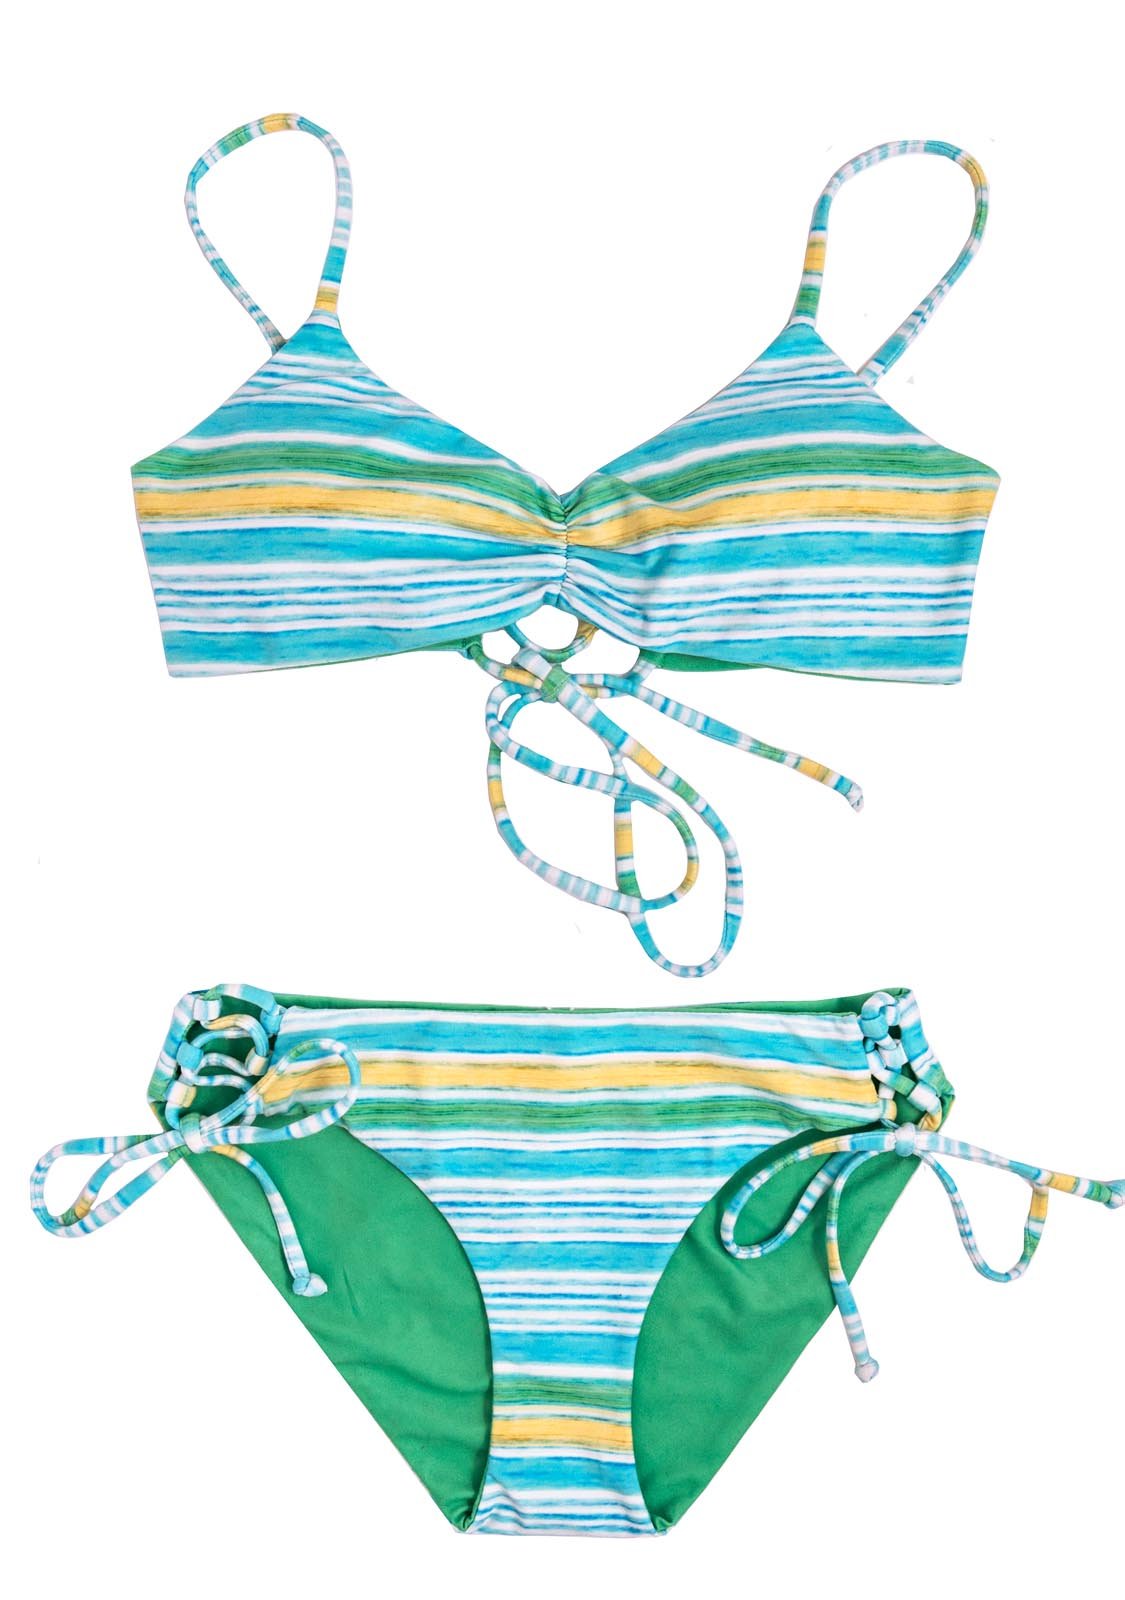 Yellow blue white and Green striped Swimsuit for teen girl age 10-16 with padding in top